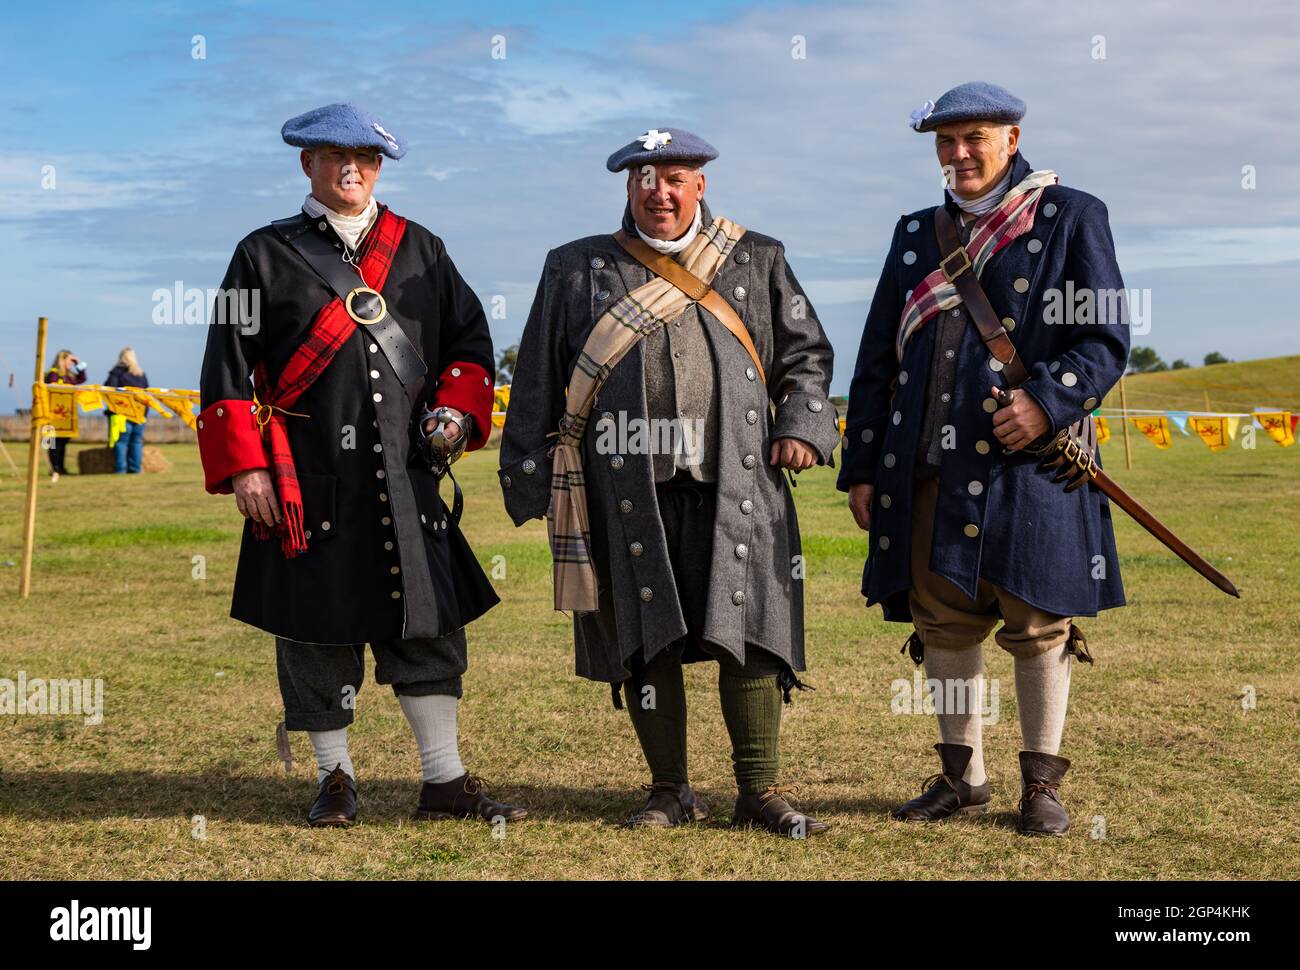 A group of Jacobite Scotsmen in period costume for re-enactment of Battle of Prestonpans, East Lothian, Scotland, UK Stock Photo